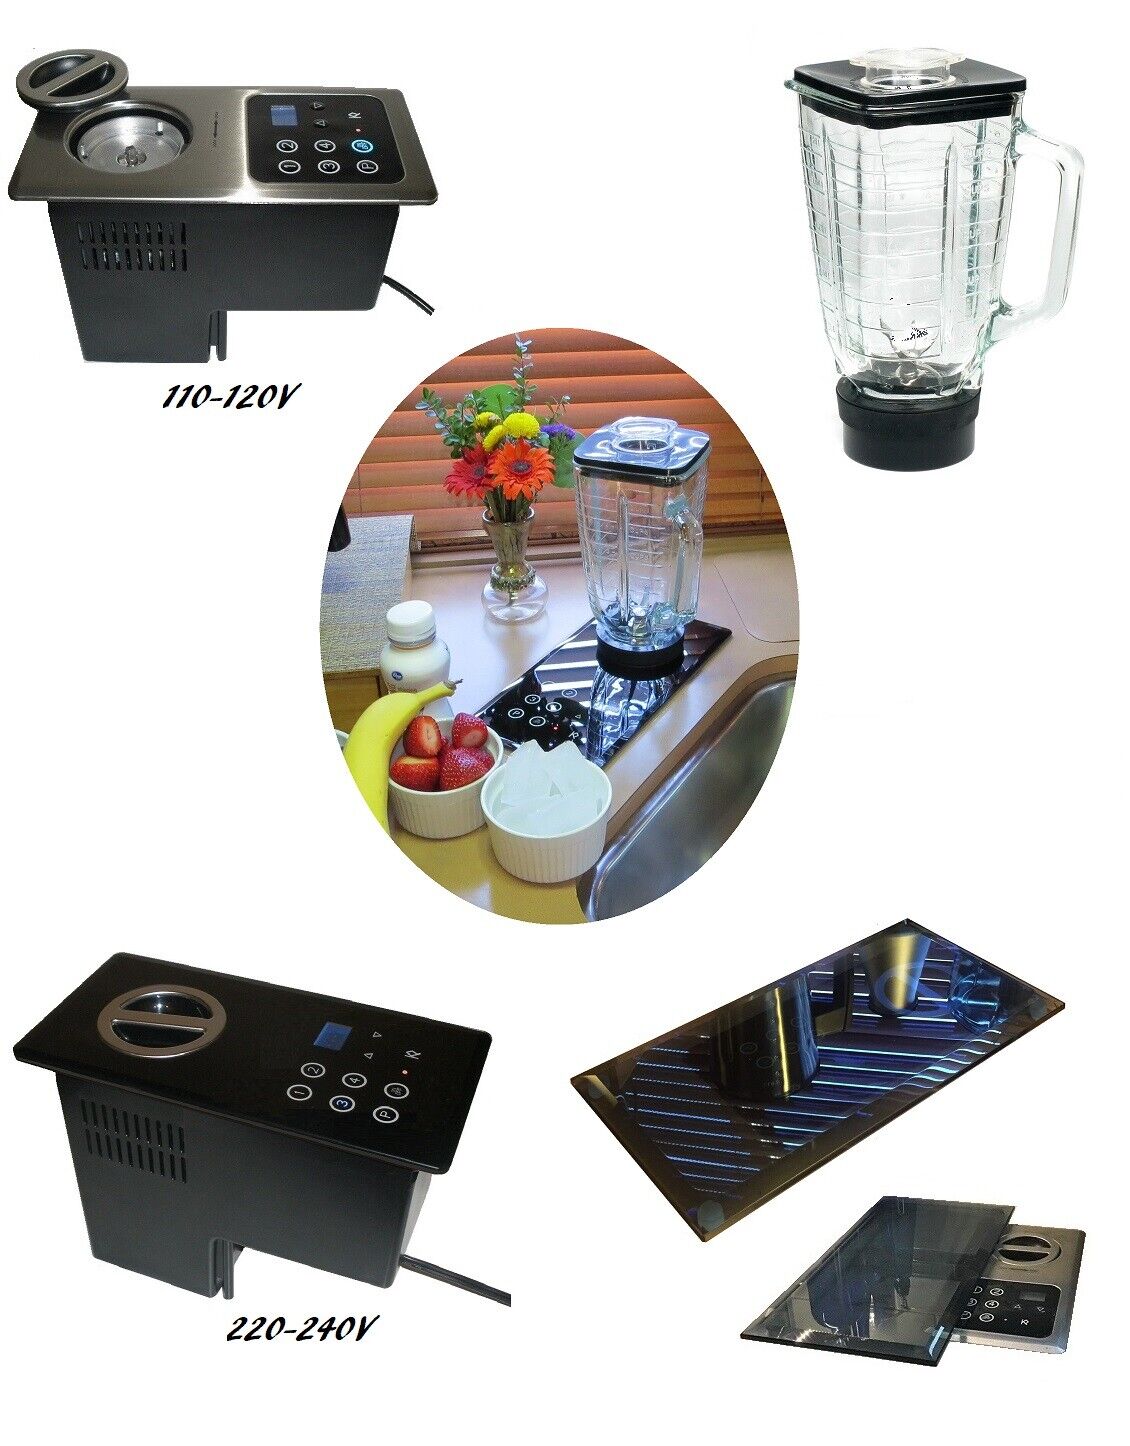 Built-in Blender: (Replaces Nutone Food Center) 1000W + Cover + 6 cup Gl Blender